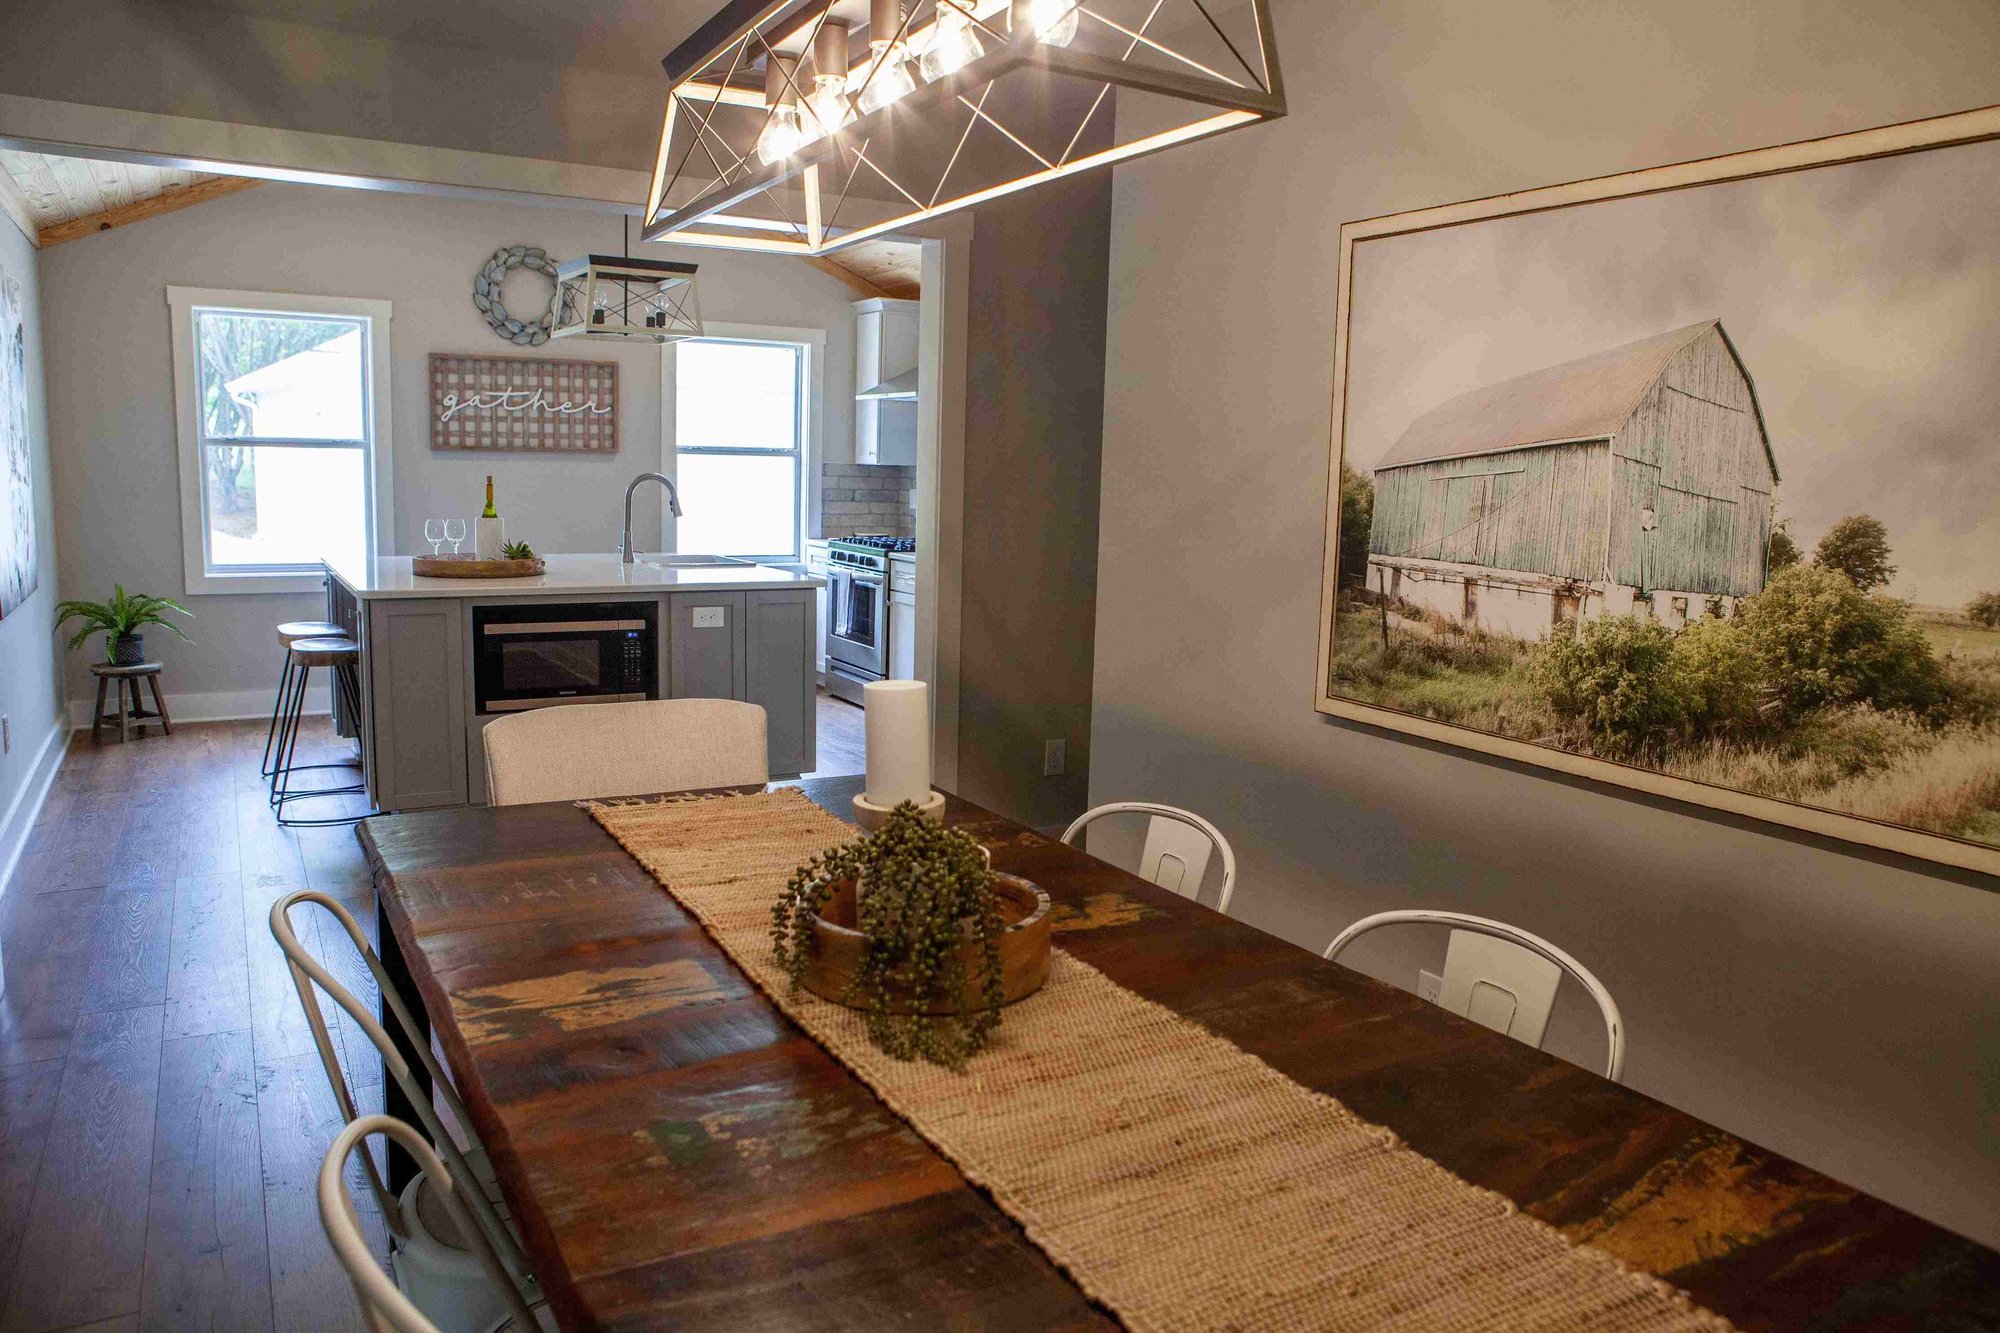 Modern Farmhouse Dining Room Table in Remodeled Home _ PAXISgroup Custom Home Builders in GA (1)_11zon